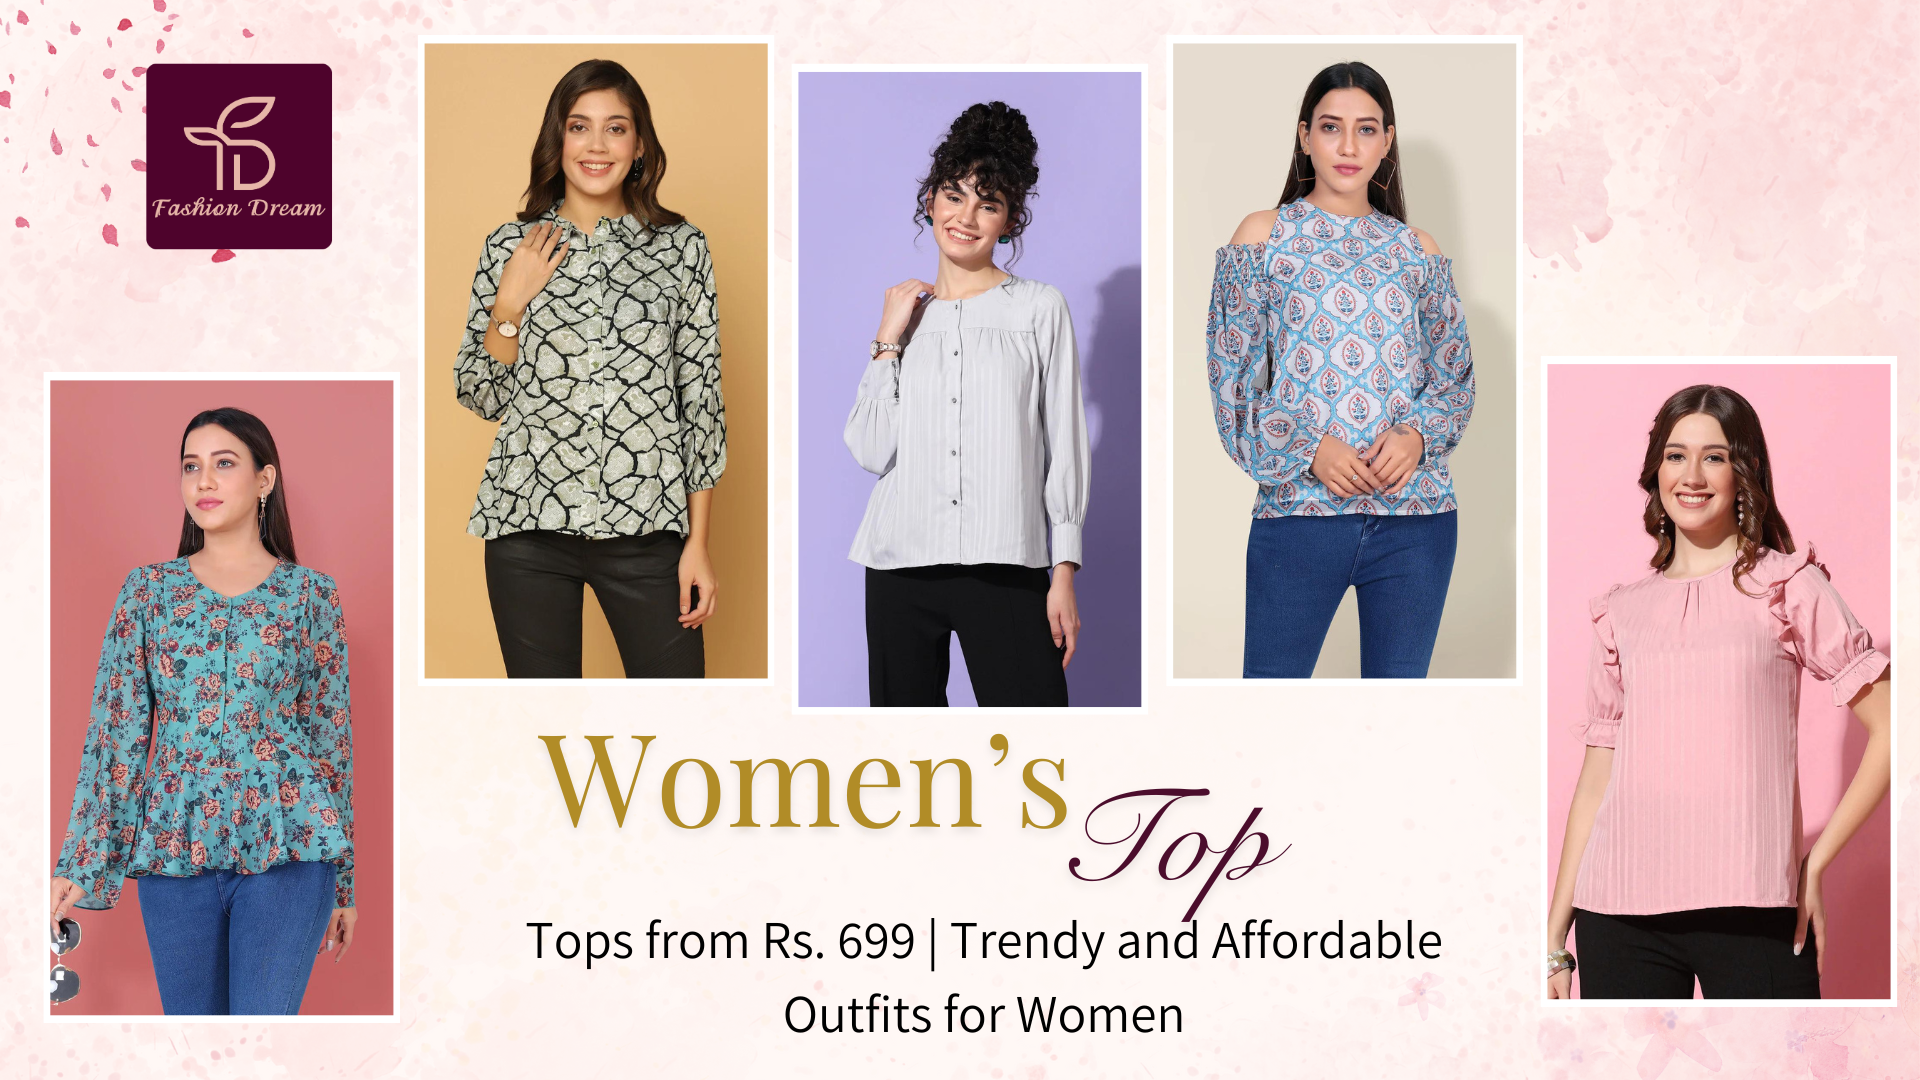 Tops from Rs. 699 | Trendy and Affordable Outfits for Women